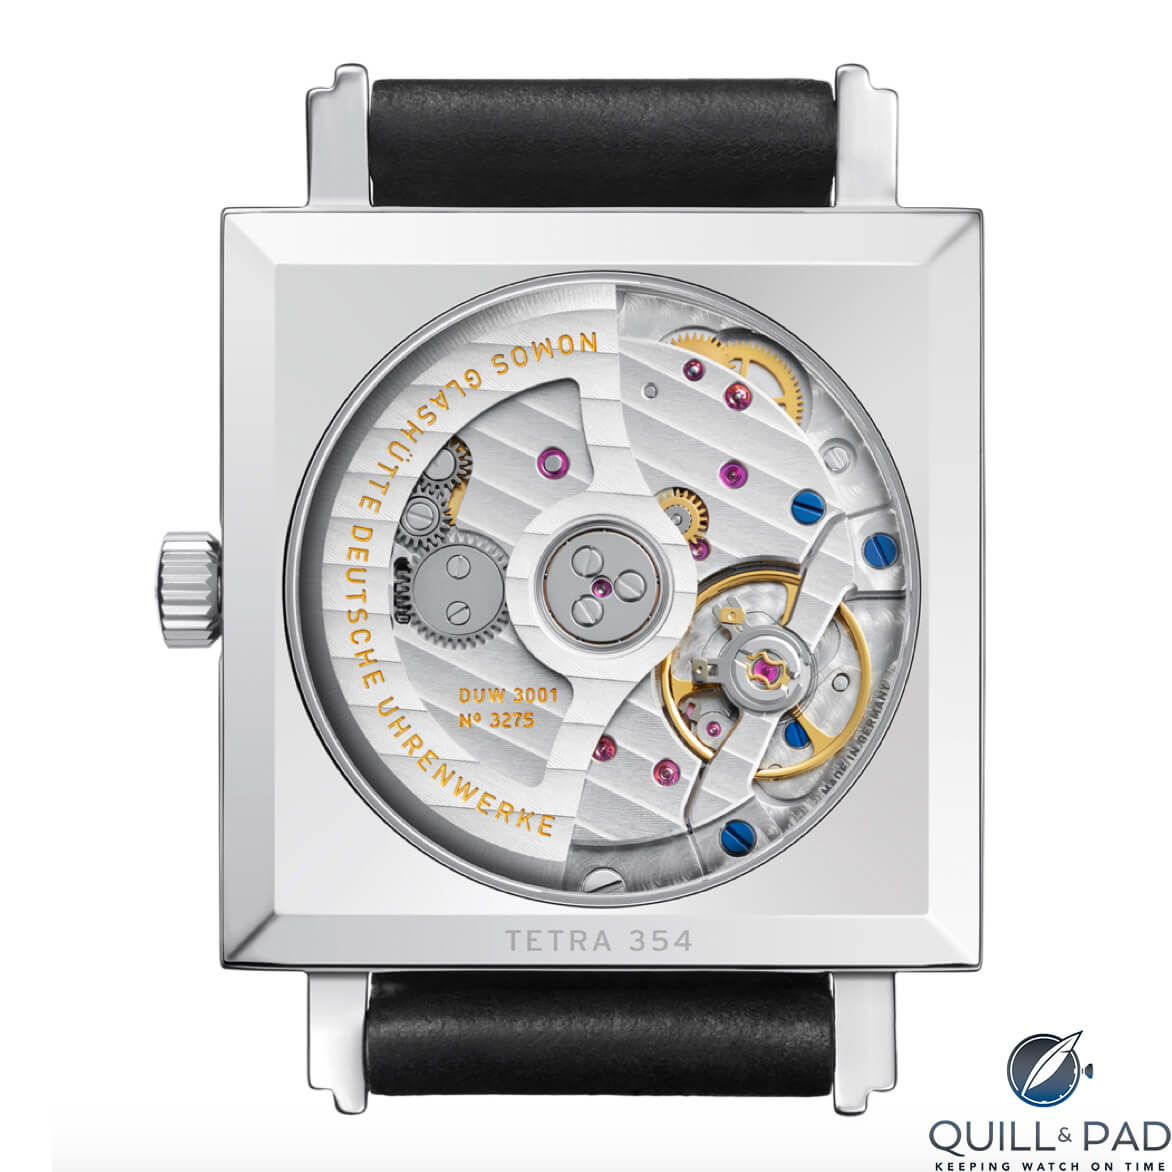 View through the display back of the Nomos Glashütte Tetra Neomatik to the in-house caliber DUW 3001 within